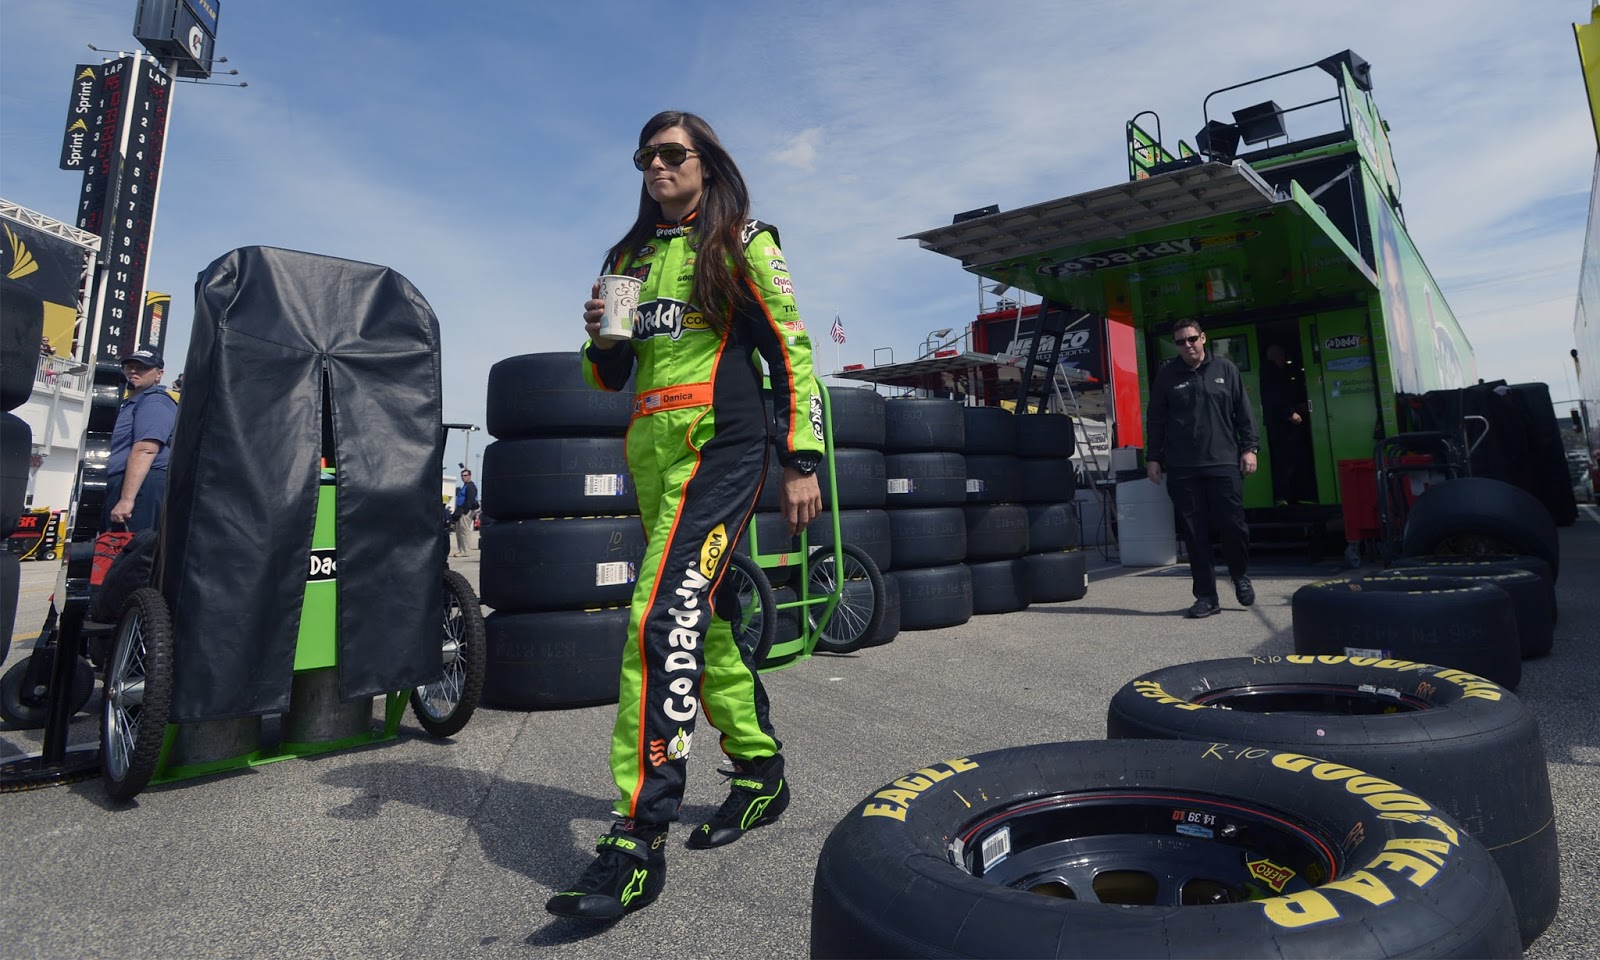 Free Download Danica Patrick Hd Wallpapers Hd Wallpapers High Images, Photos, Reviews